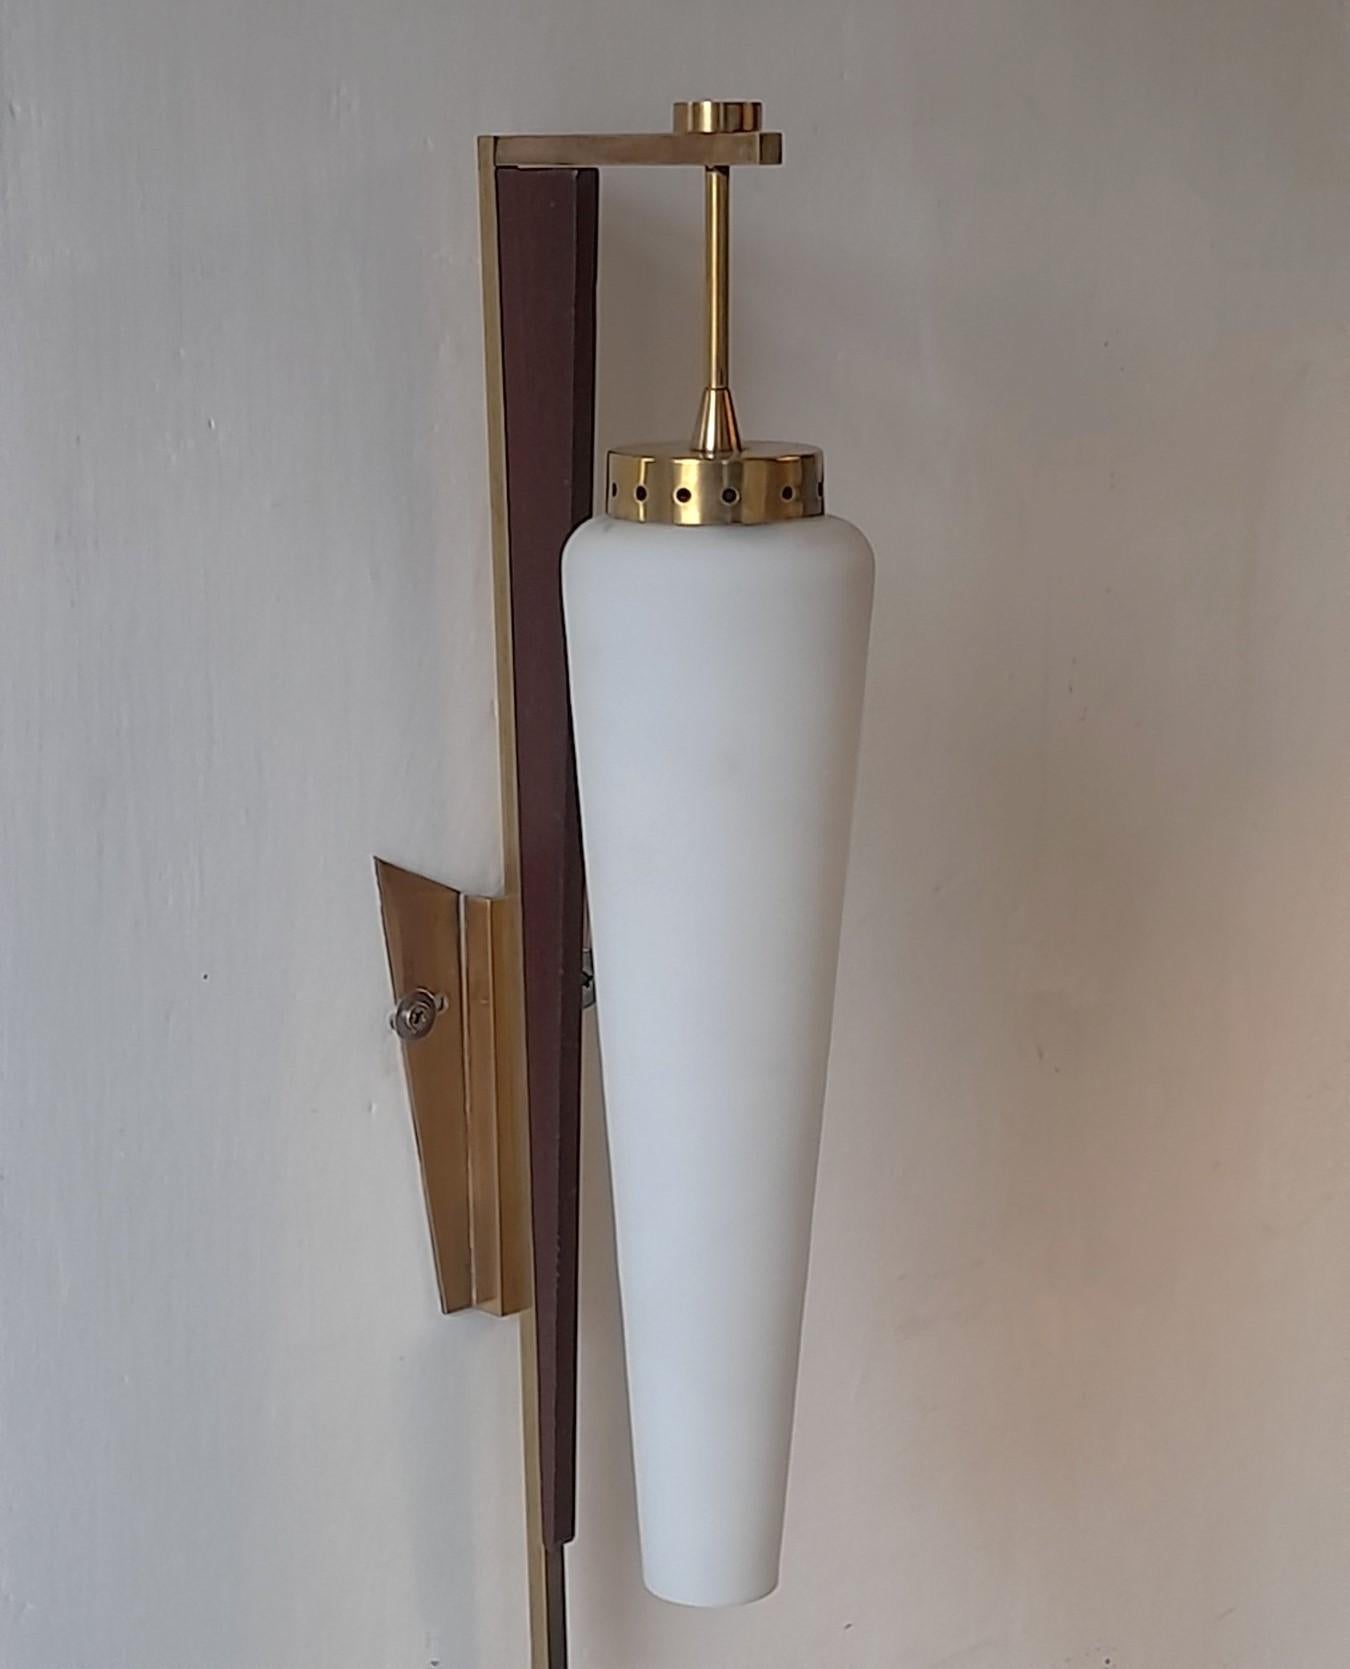 Three Stilnovo Sconces Wall Lights Brass Satin Glass Wood Accents, Italy, 1950s For Sale 4